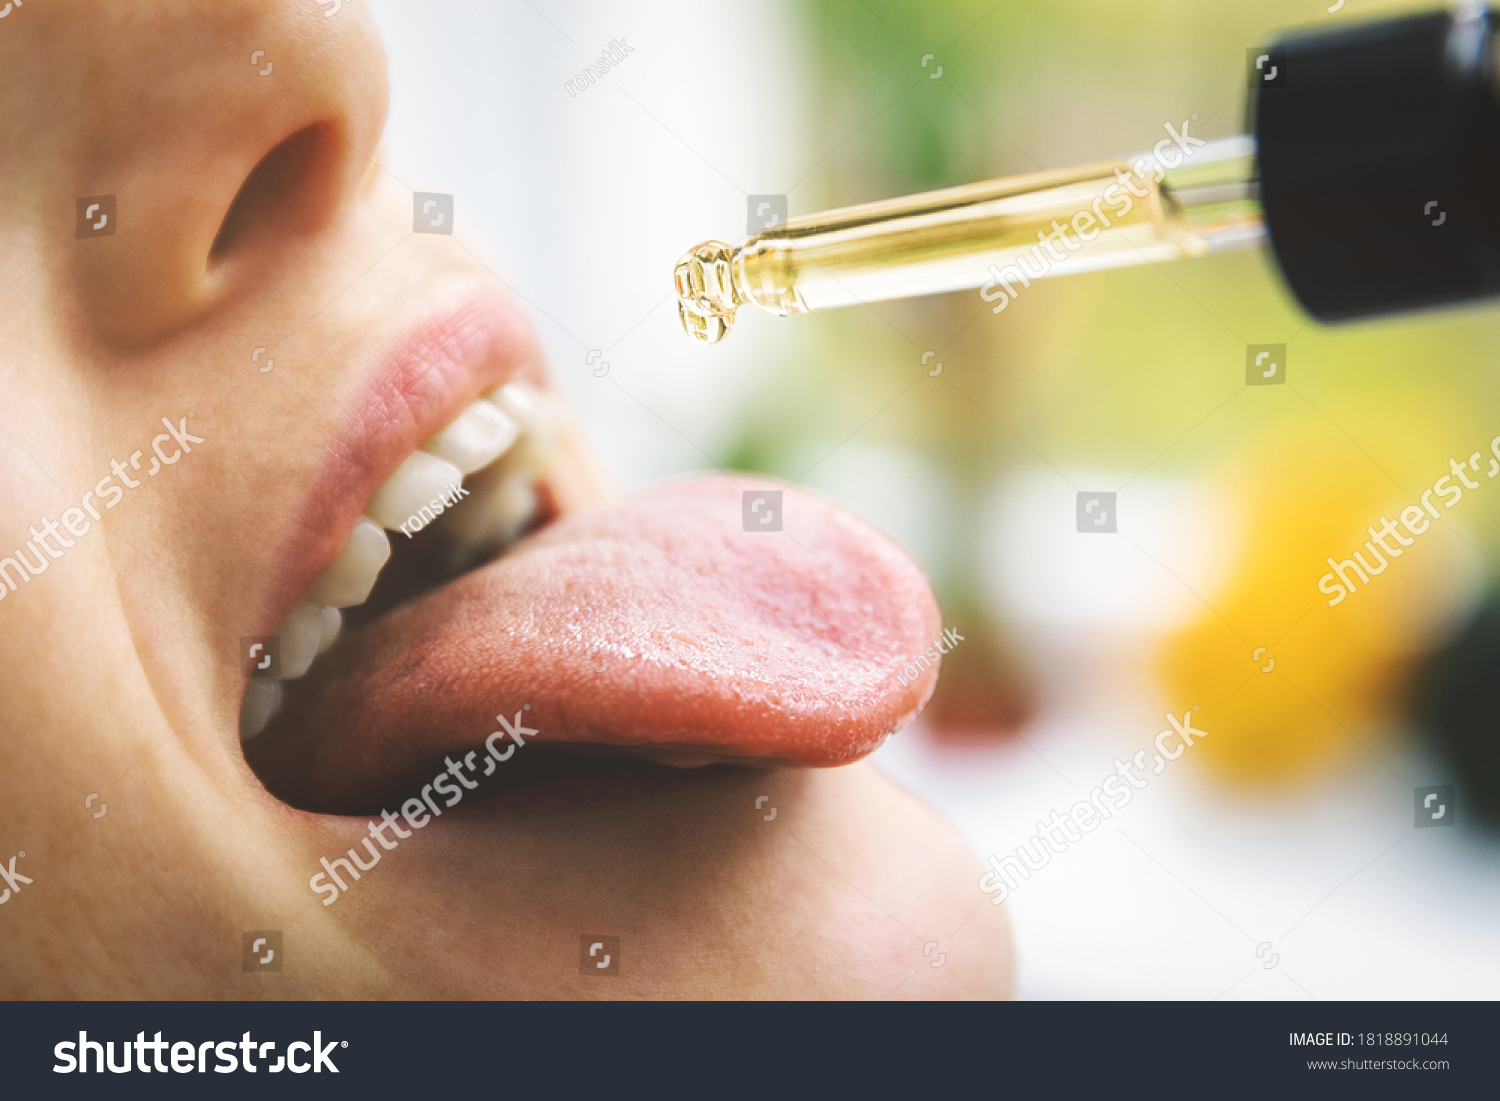 herbal alternative medicine and dietary supplements - woman taking cbd hemp oil drops in mouth from dropper. medical cannabis #1818891044